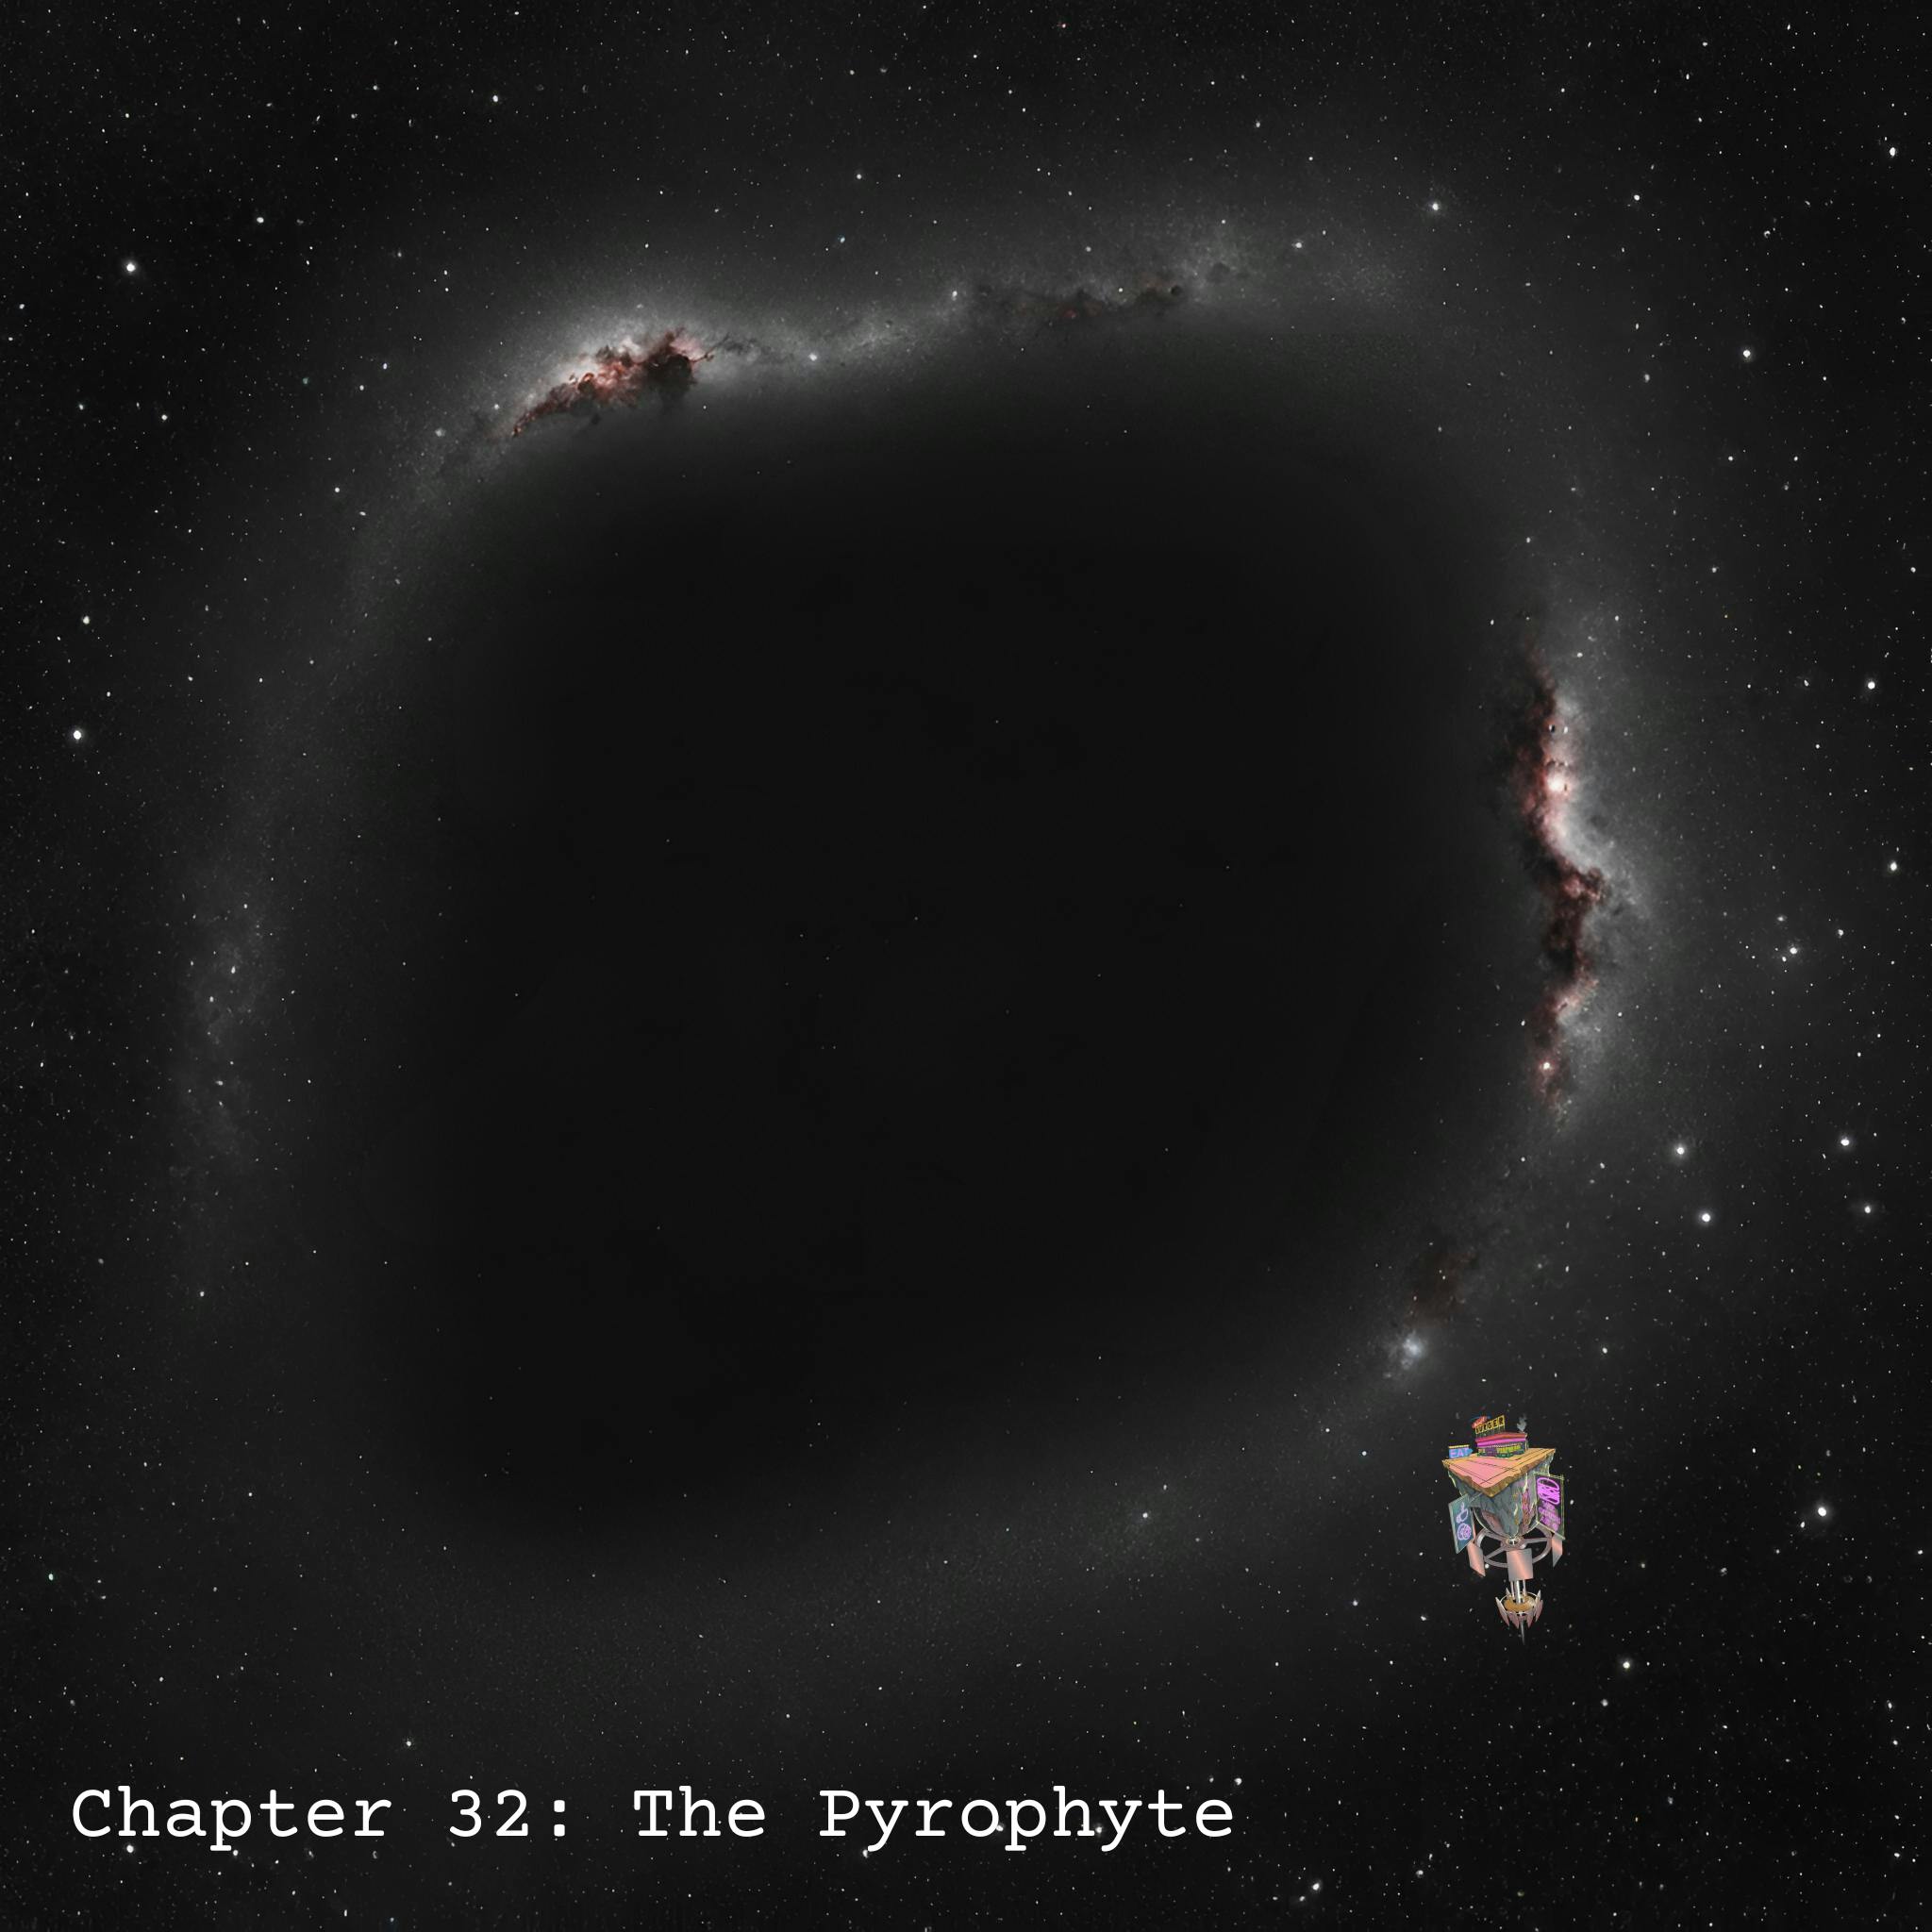 Chapter 32: The Pyrophyte